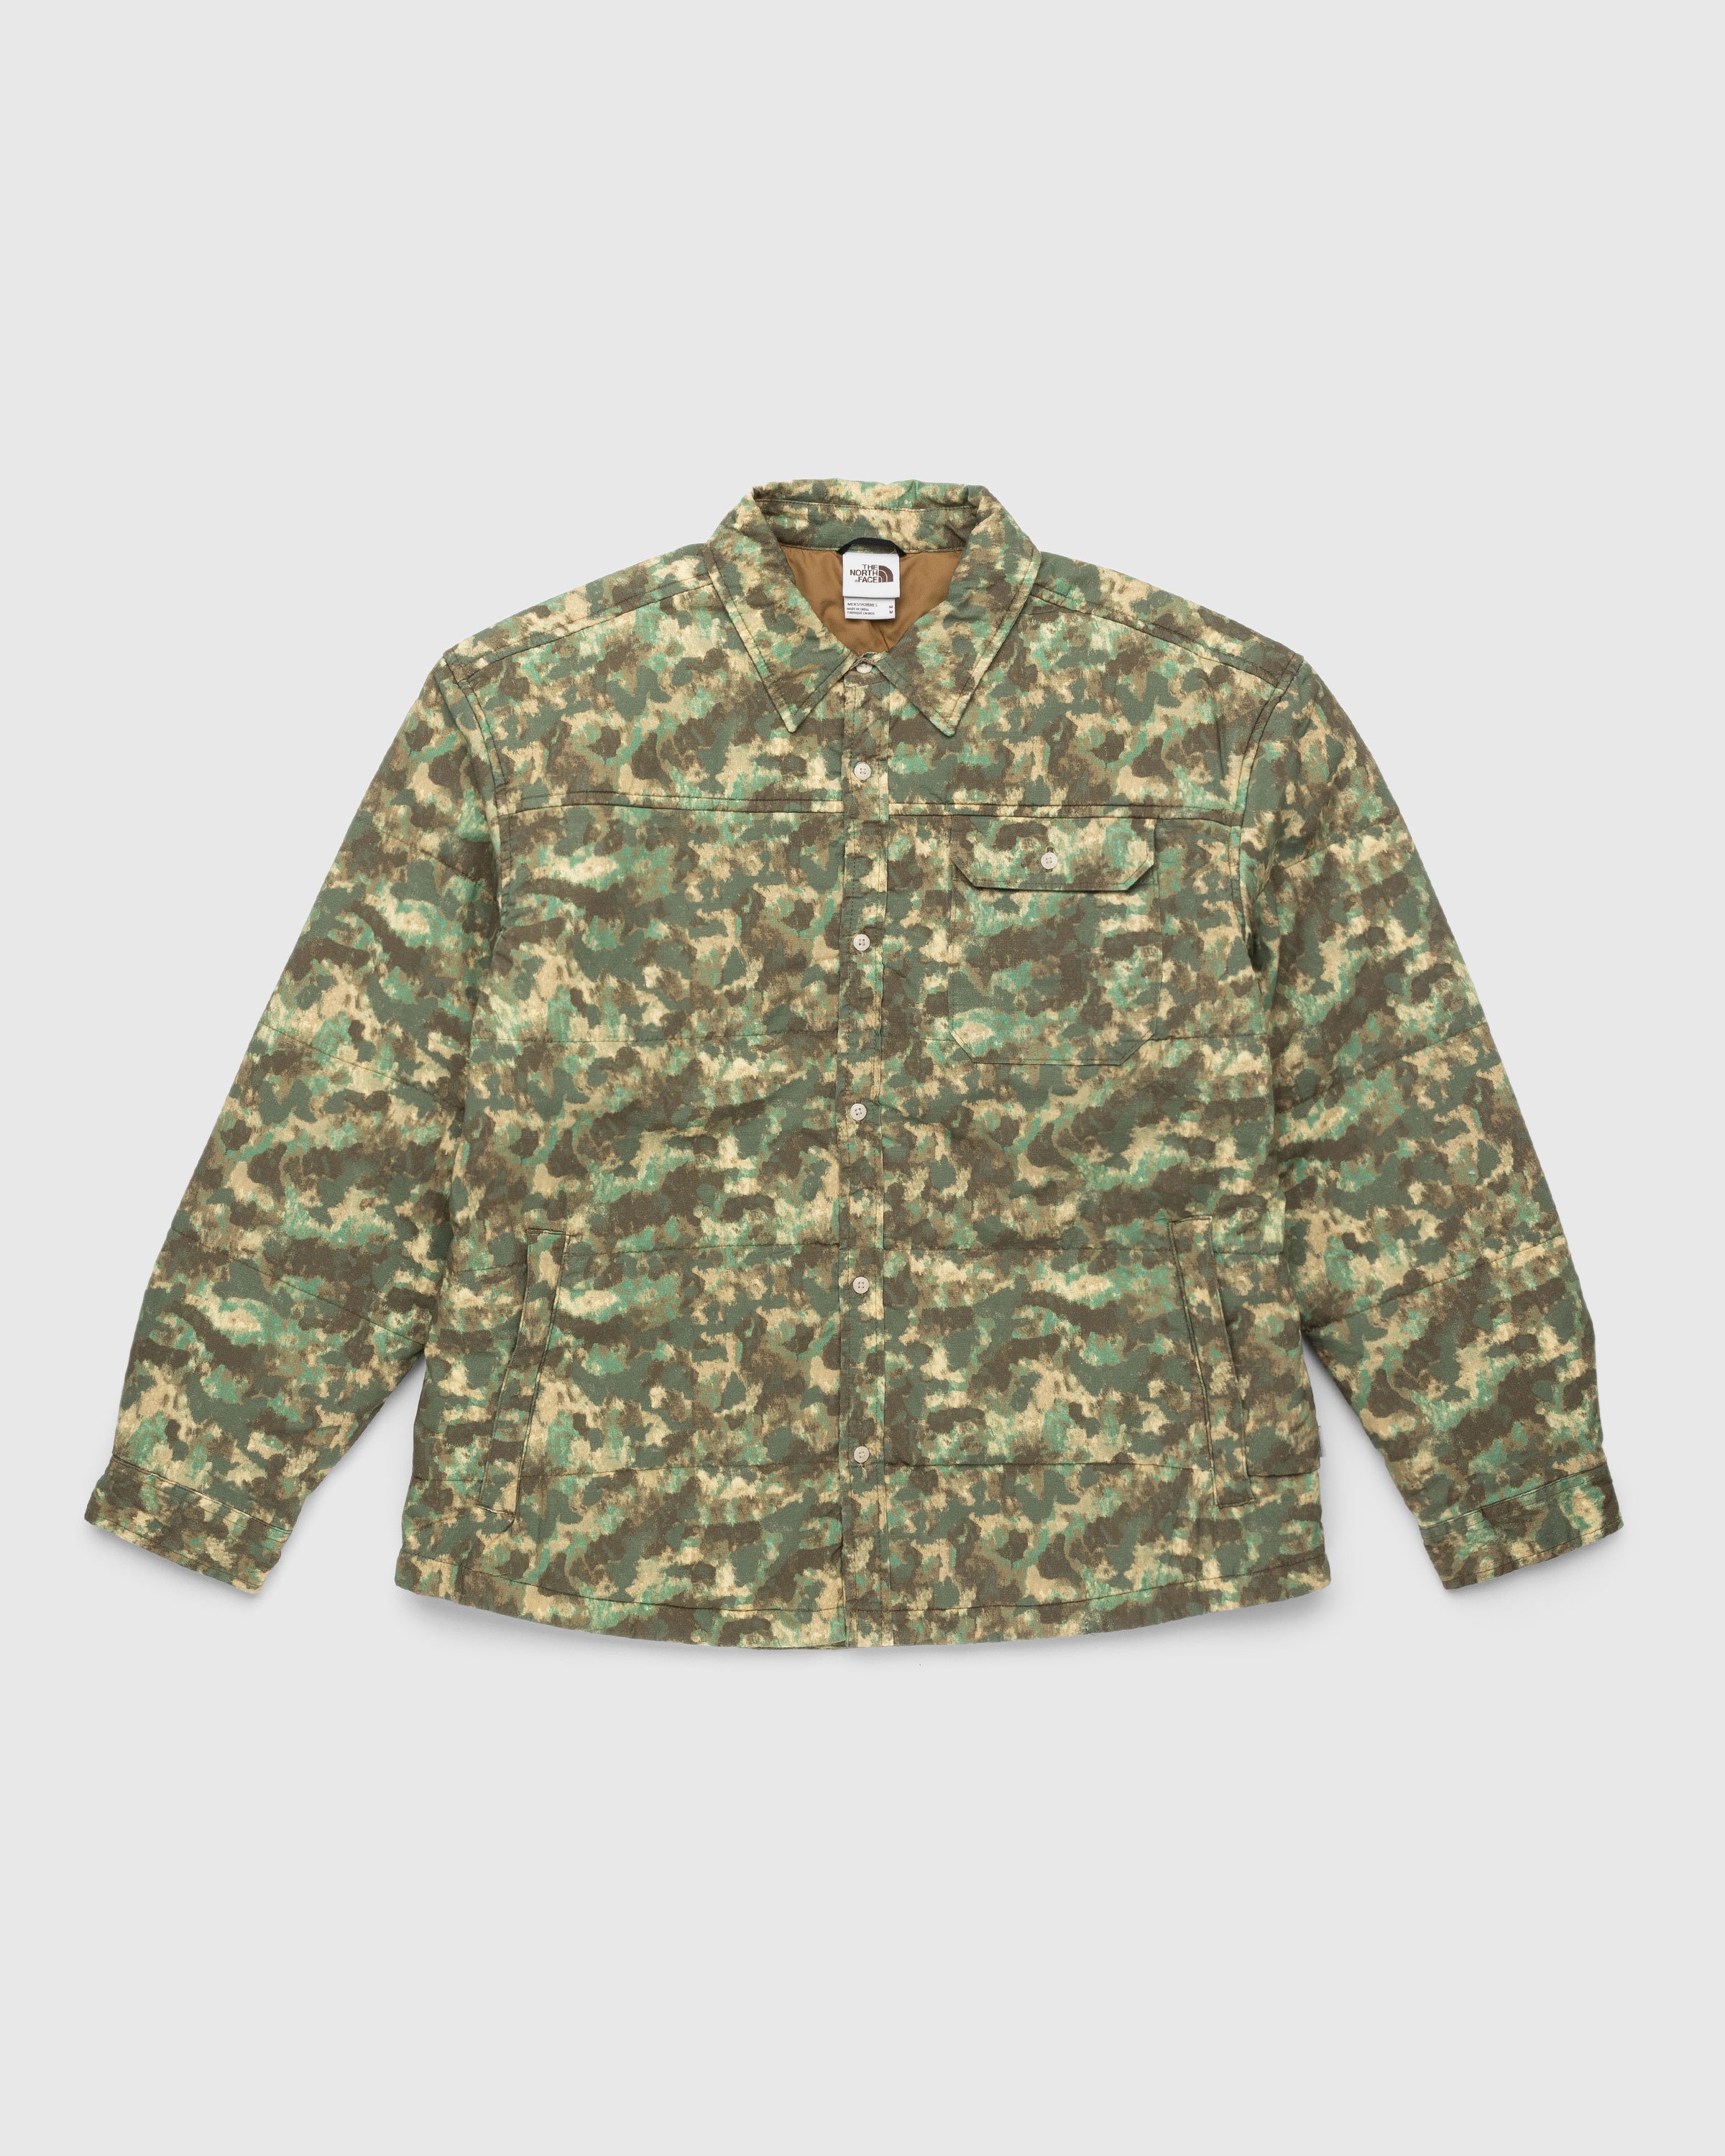 The North Face - M66 Stuffed Shirt Jacket Military Olive/Stippled Camo Print - Clothing - Green - Image 1